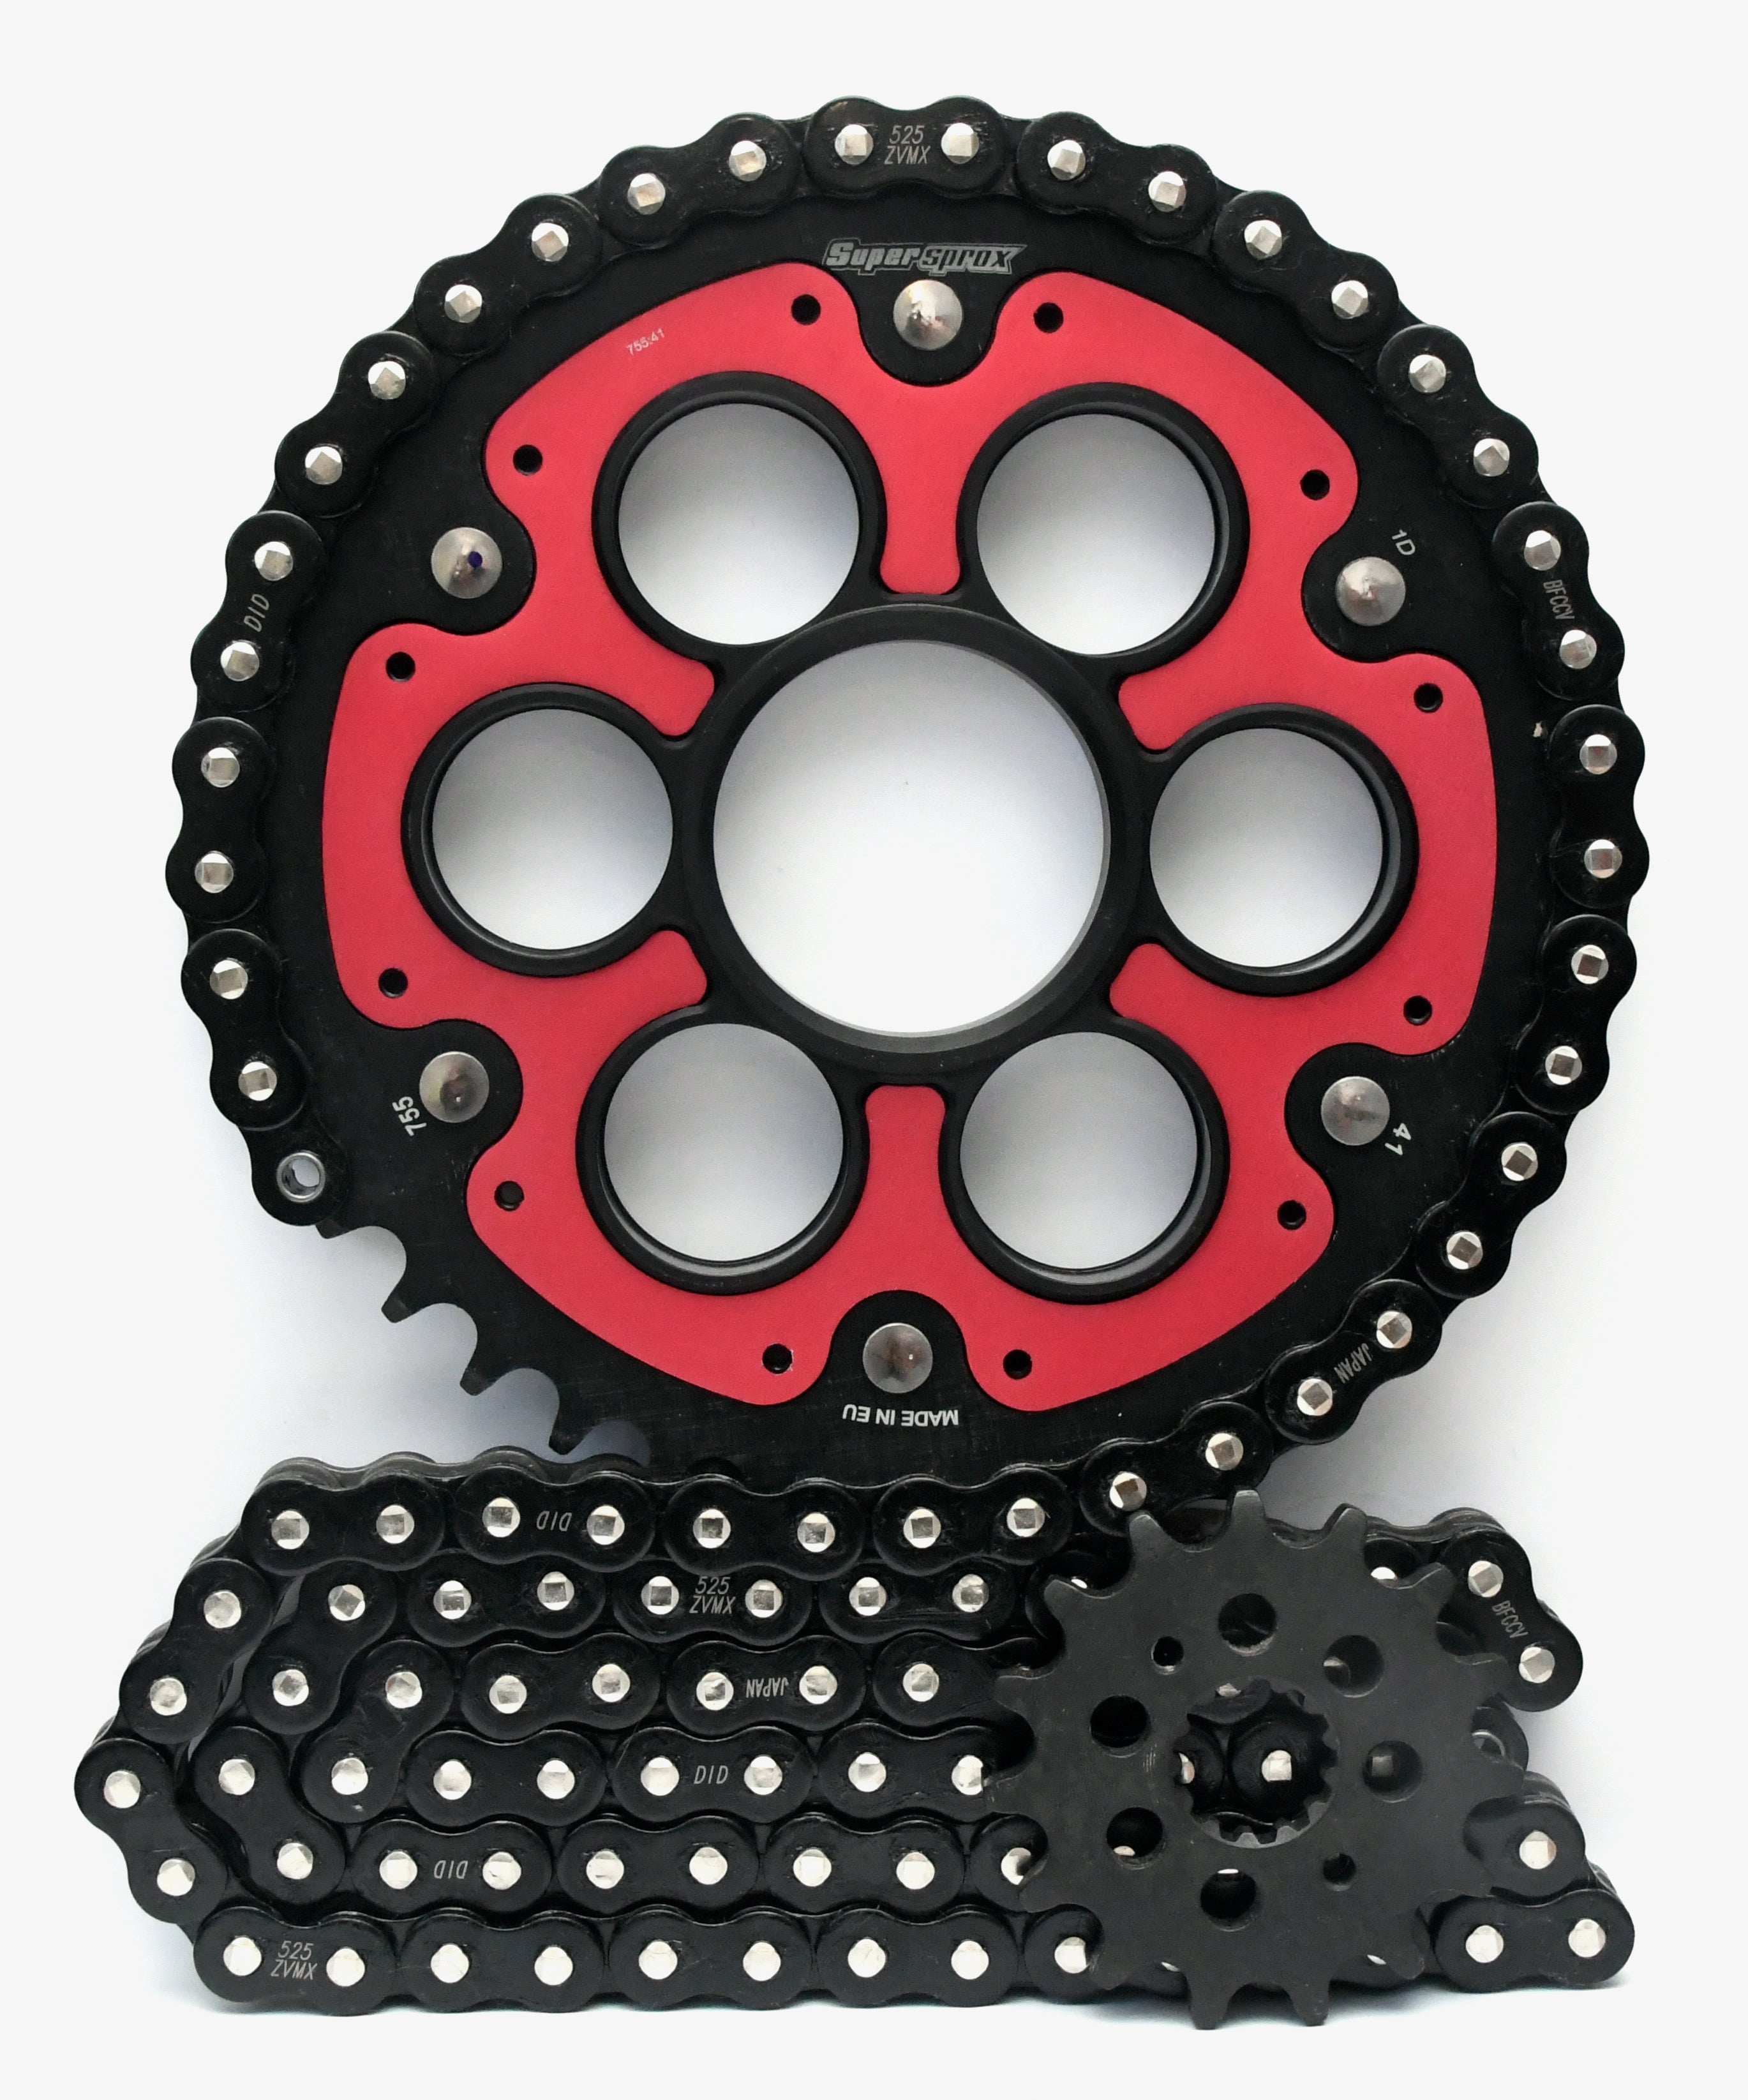 Supersprox Chain & Sprocket Kit for Ducati Panigale 1199 and 1299 - Standard Gearing